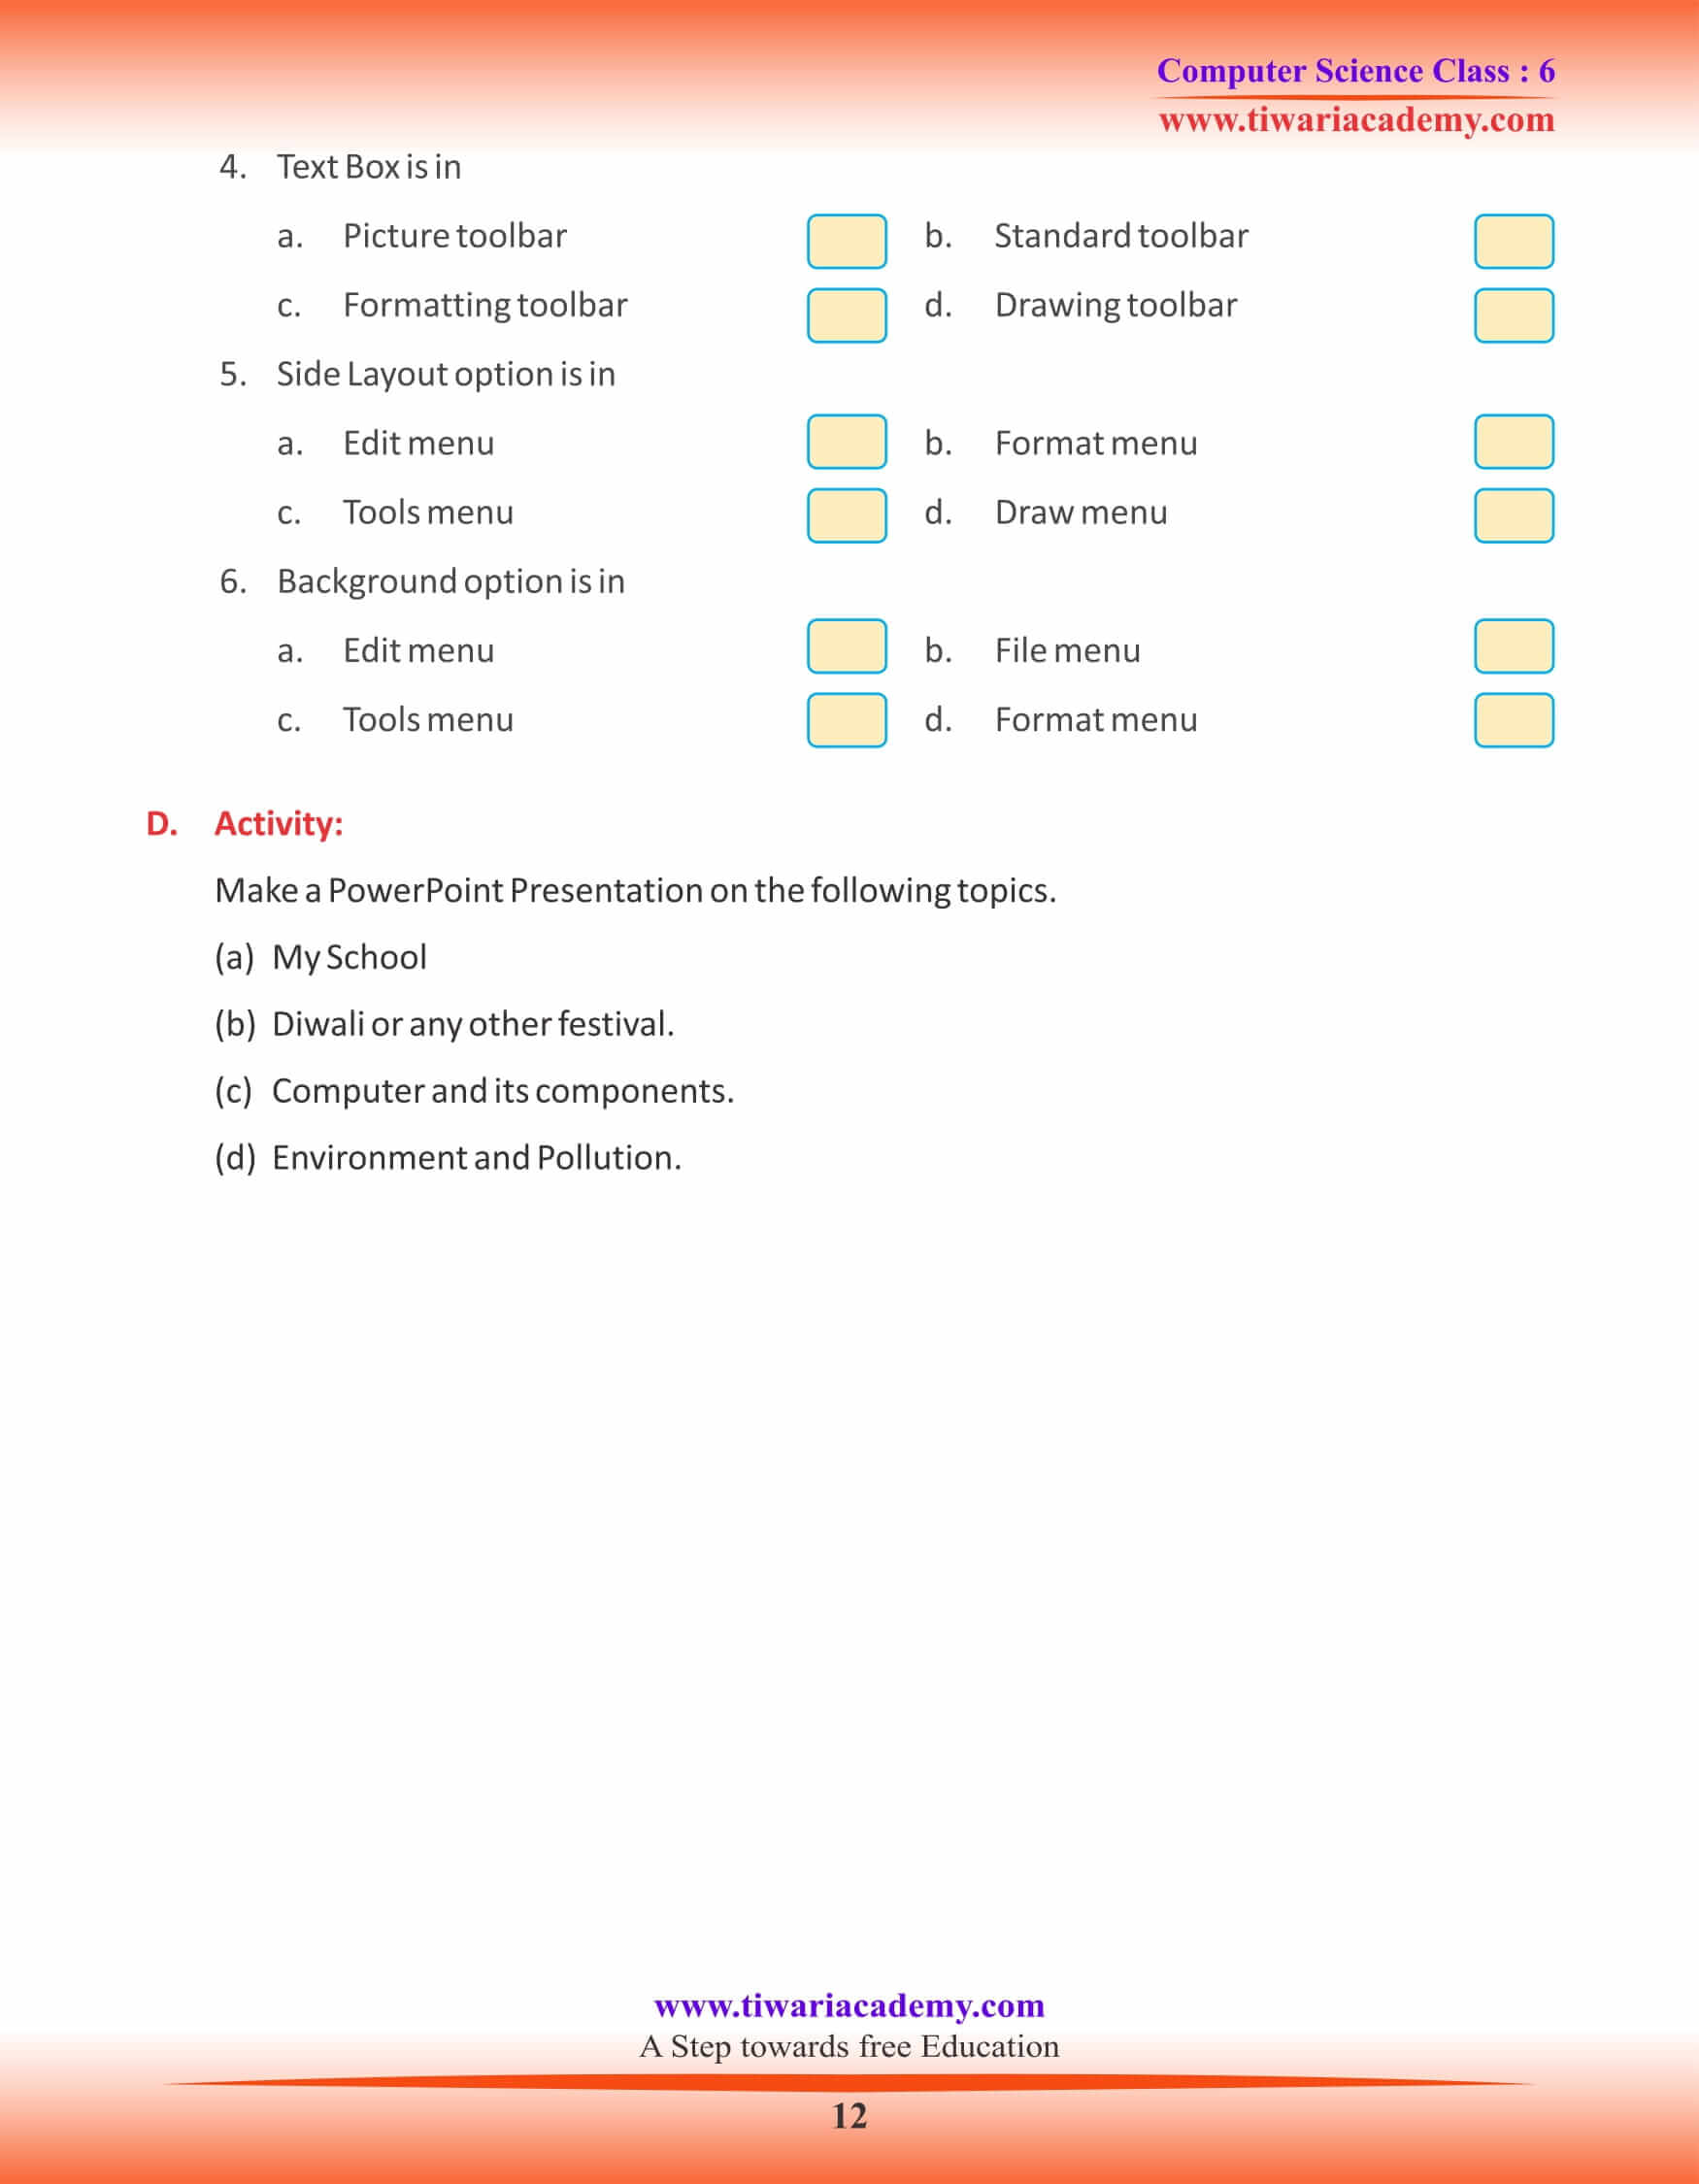 Class 6 Computer Science Chapter 5 Worksheets